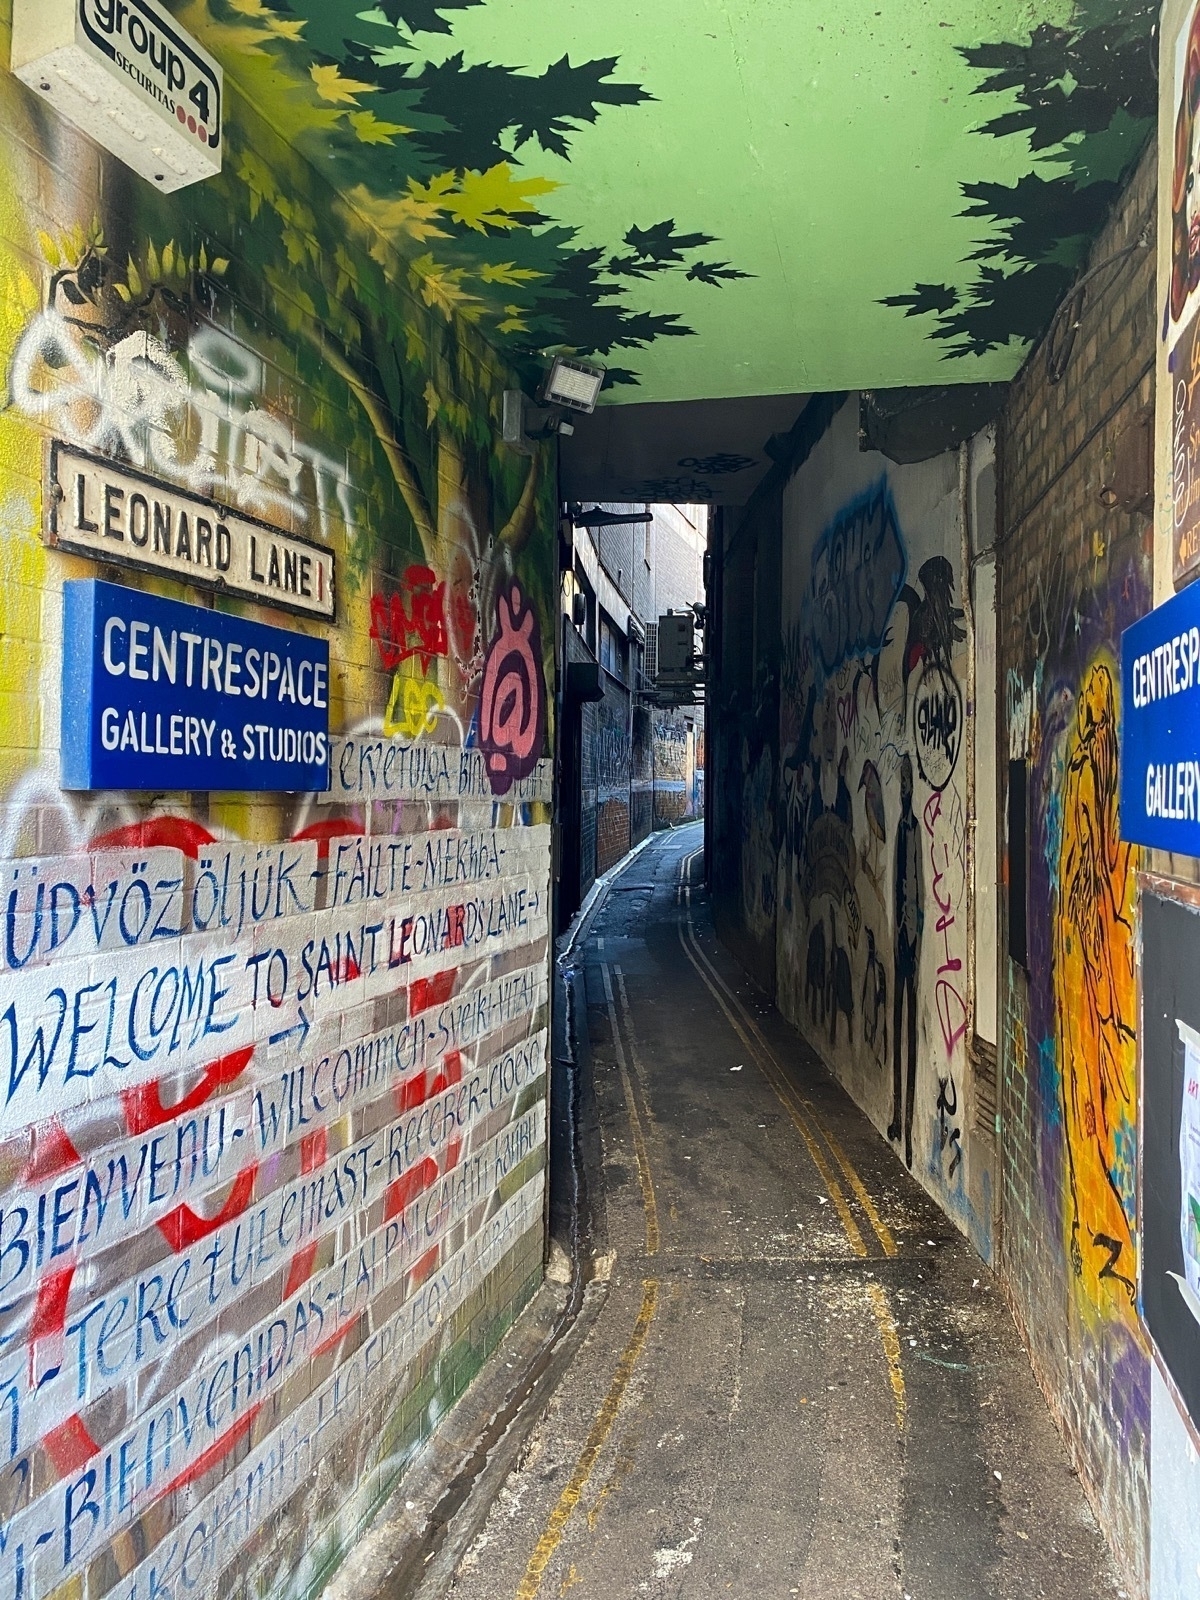 Narrow alleyway with painted signs, decorations and graffiti